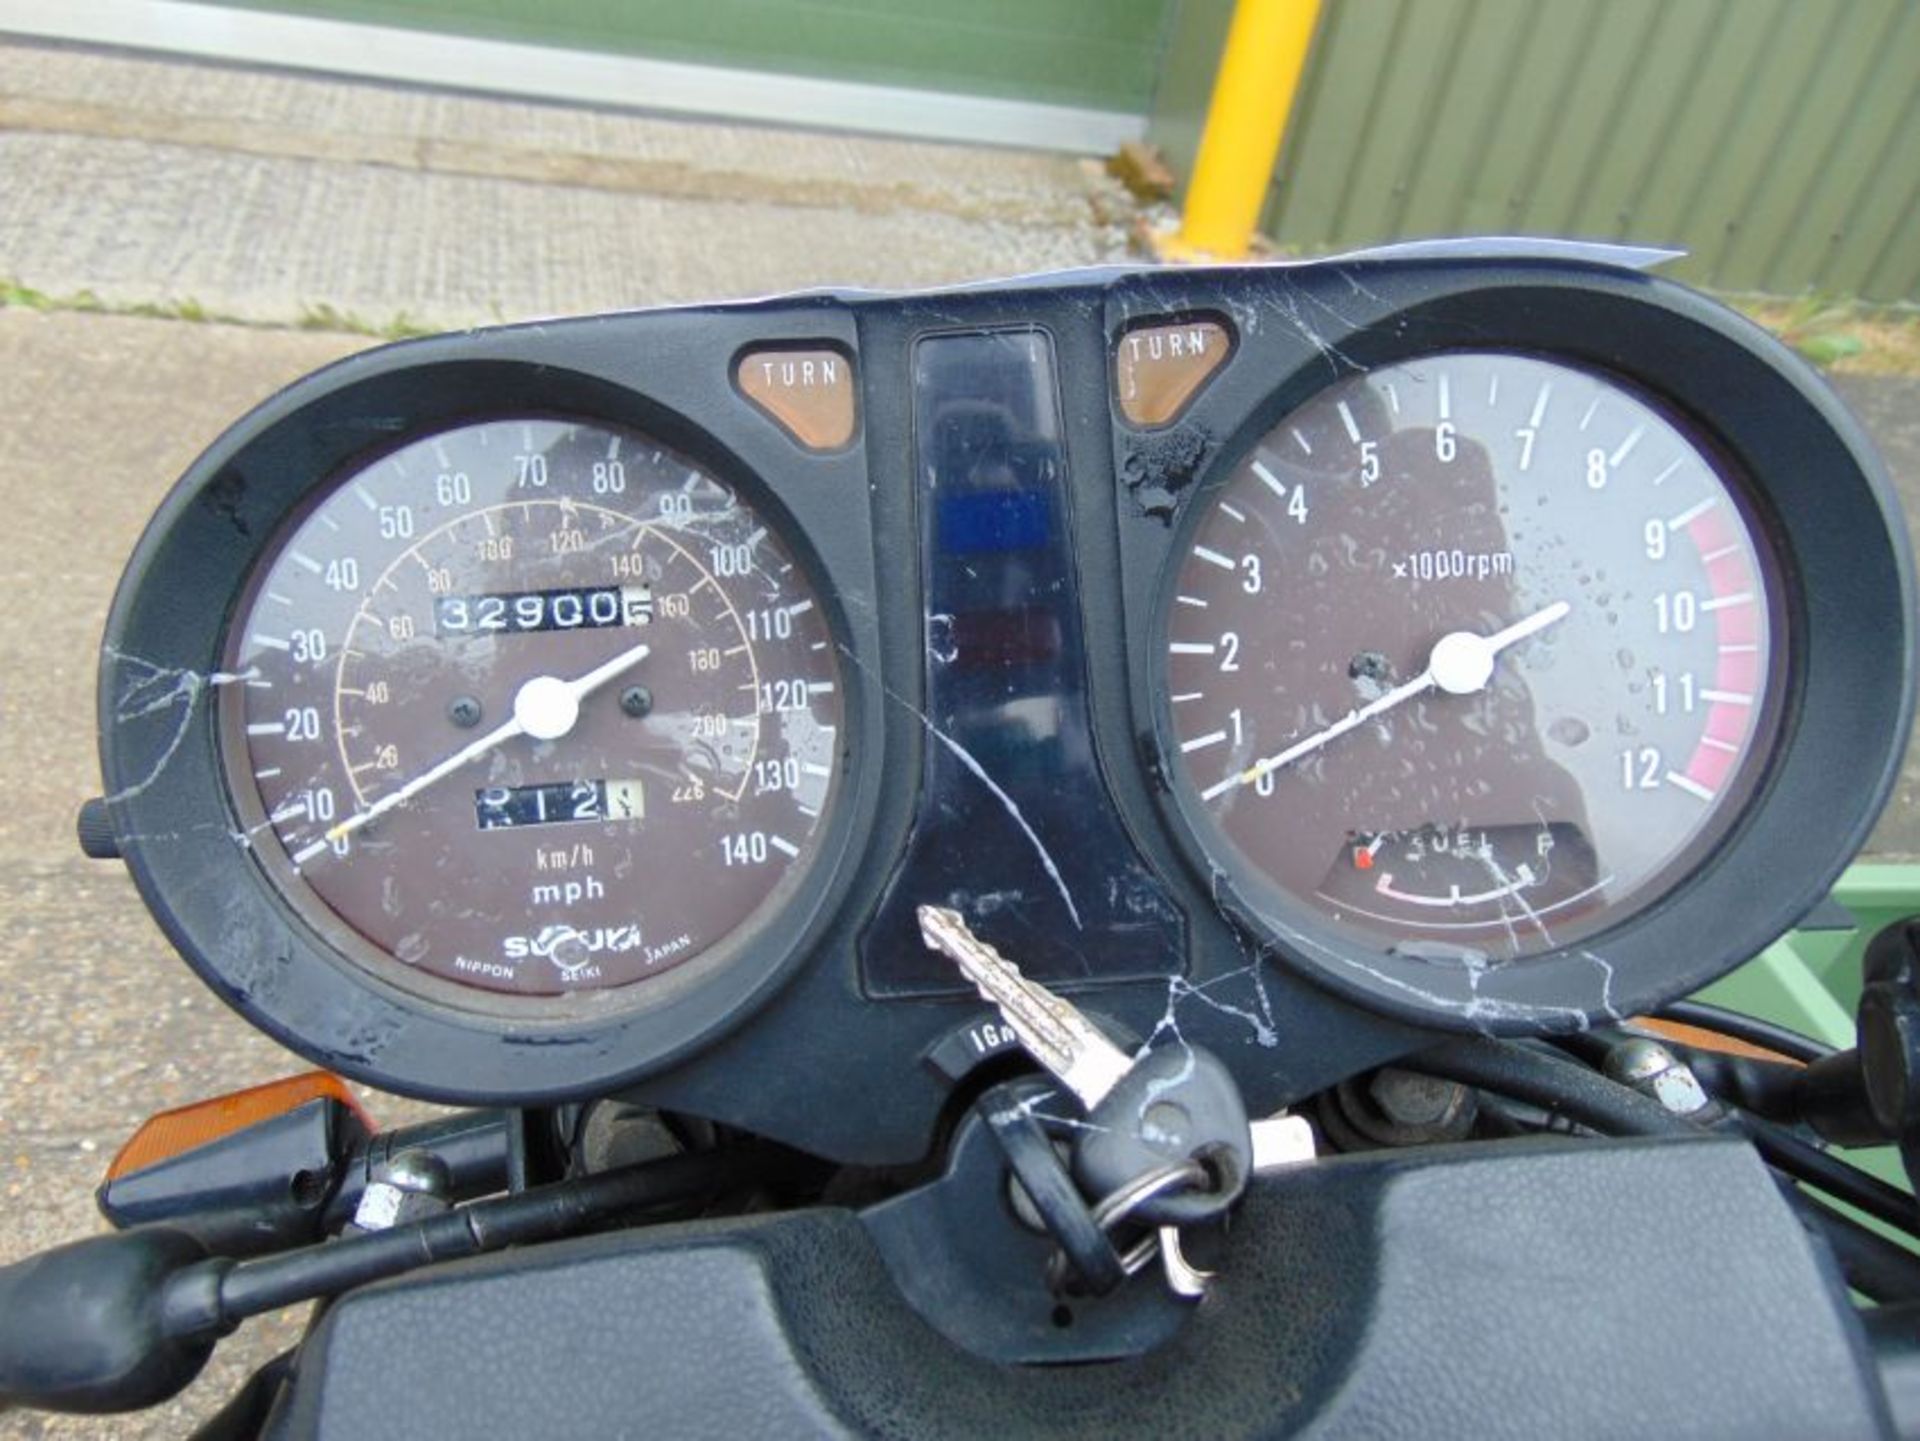 Rare Classic 1980 Suzuki GS1000 G Shaft Drive from a private collection - Image 12 of 16